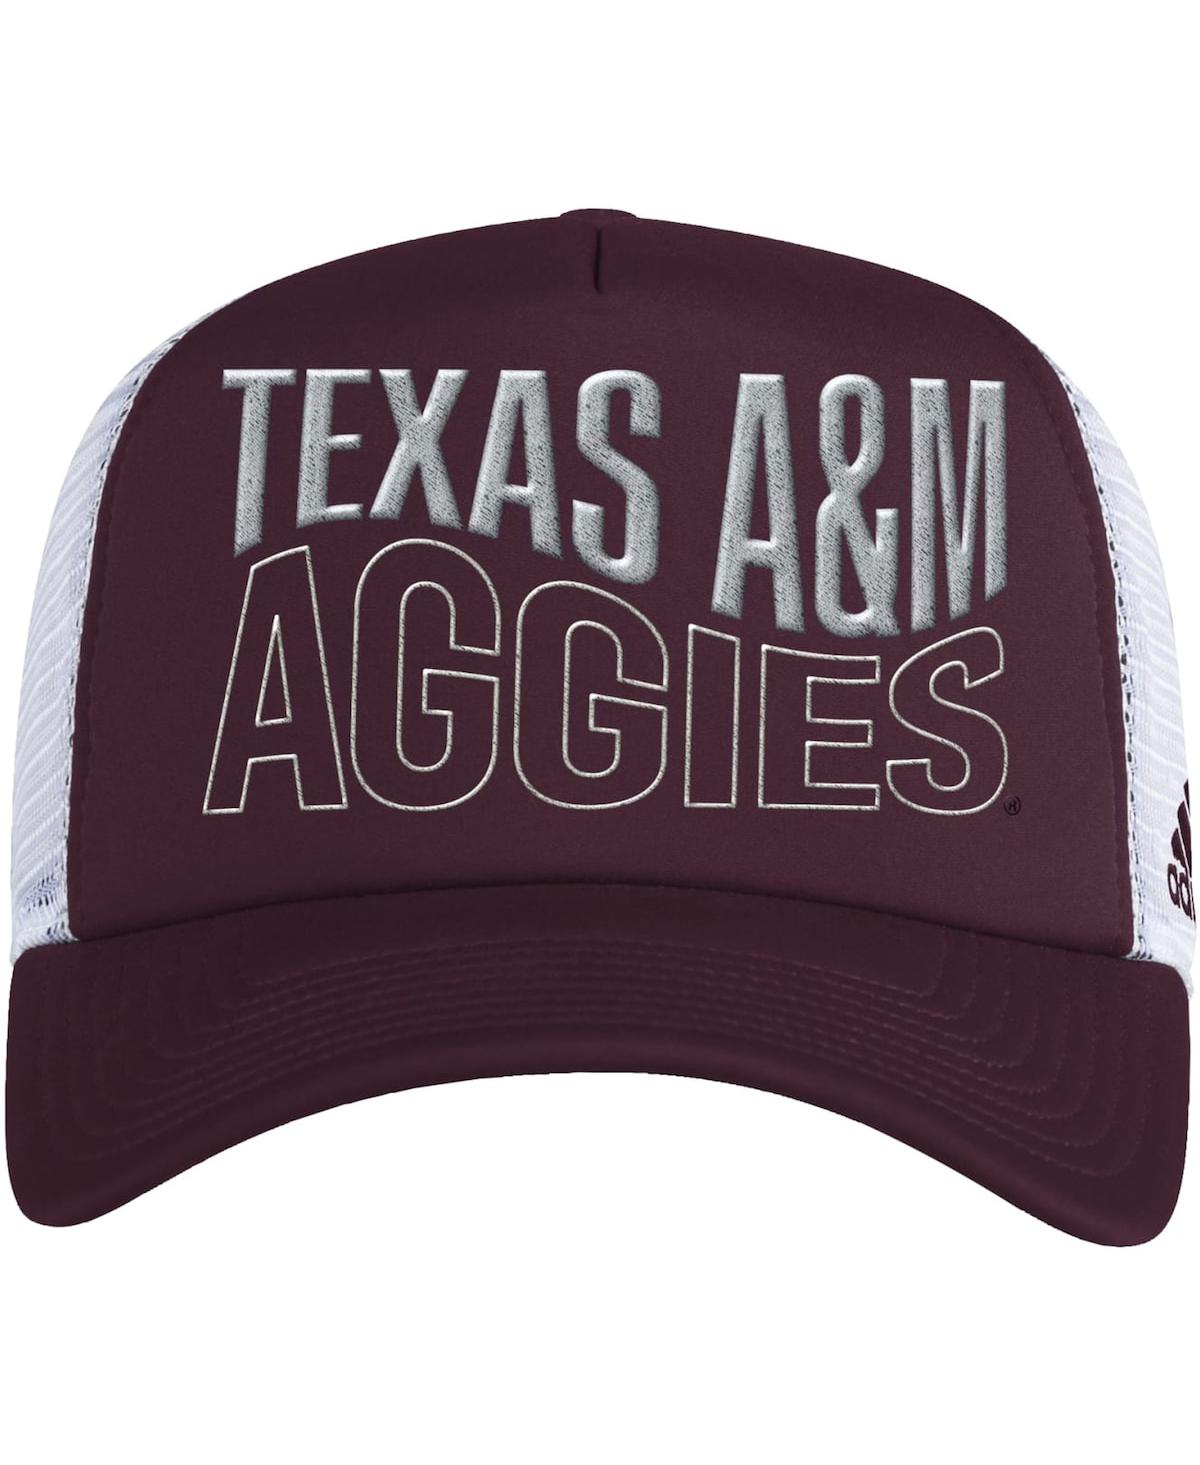 Adidas Originals Men's Adidas Maroon And White Texas A&m Aggies Wave Foam Trucker Snapback Hat In Maroon,white